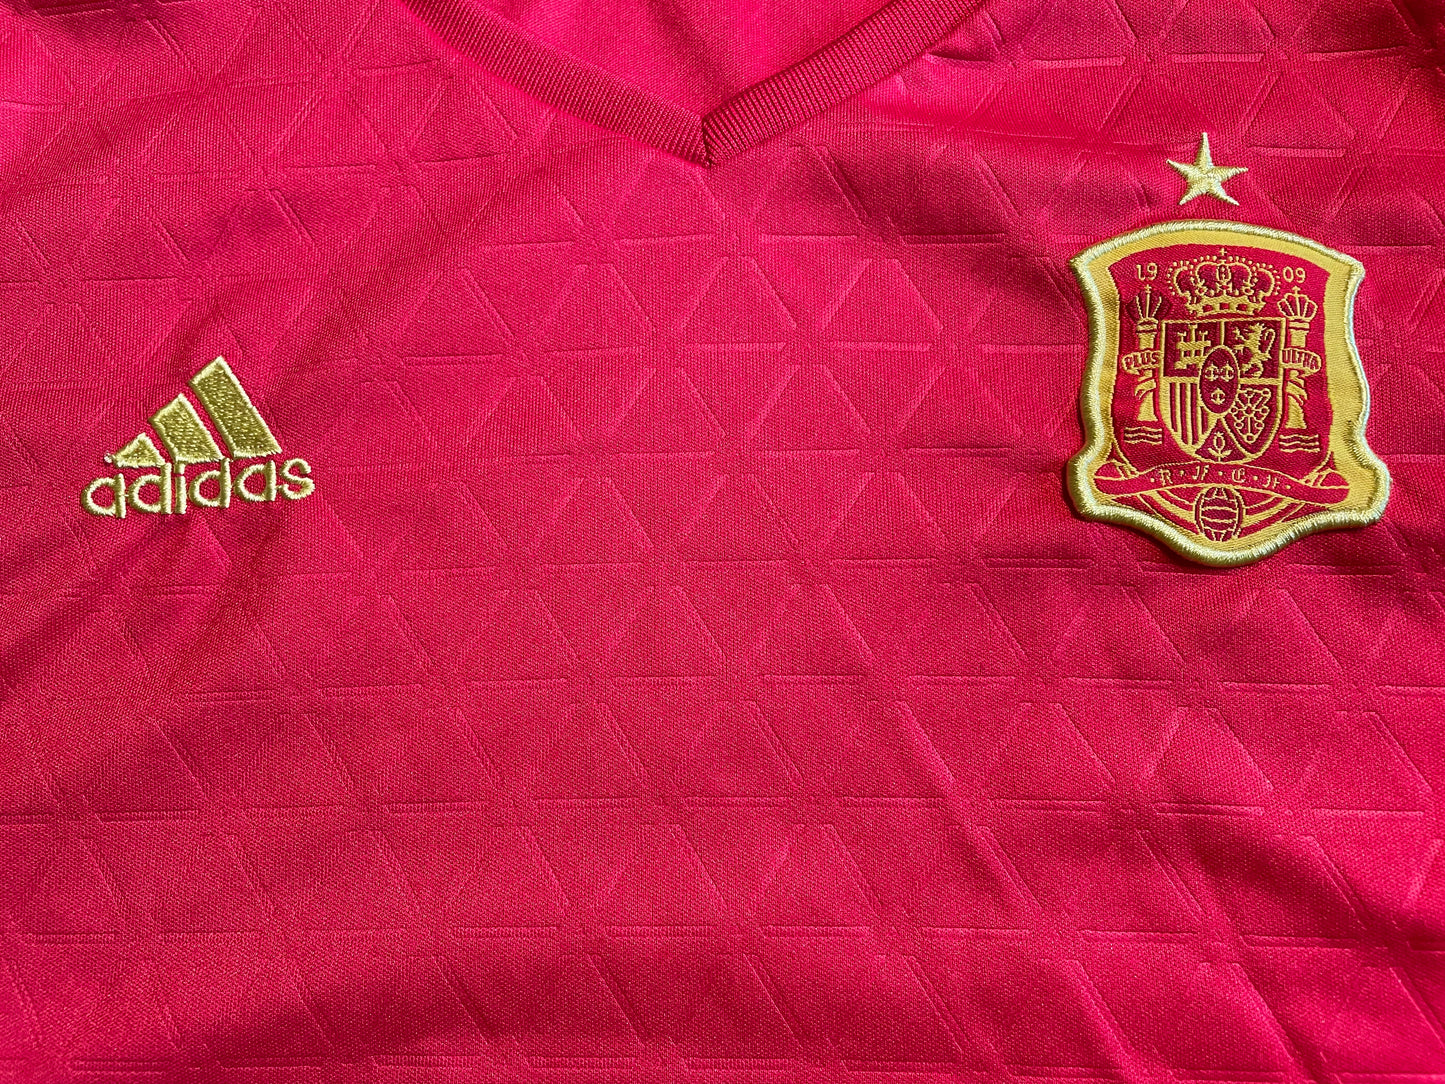 Spain Home Shirt 2016 (very good) Childs size 22, 8 years? Height 18 inches